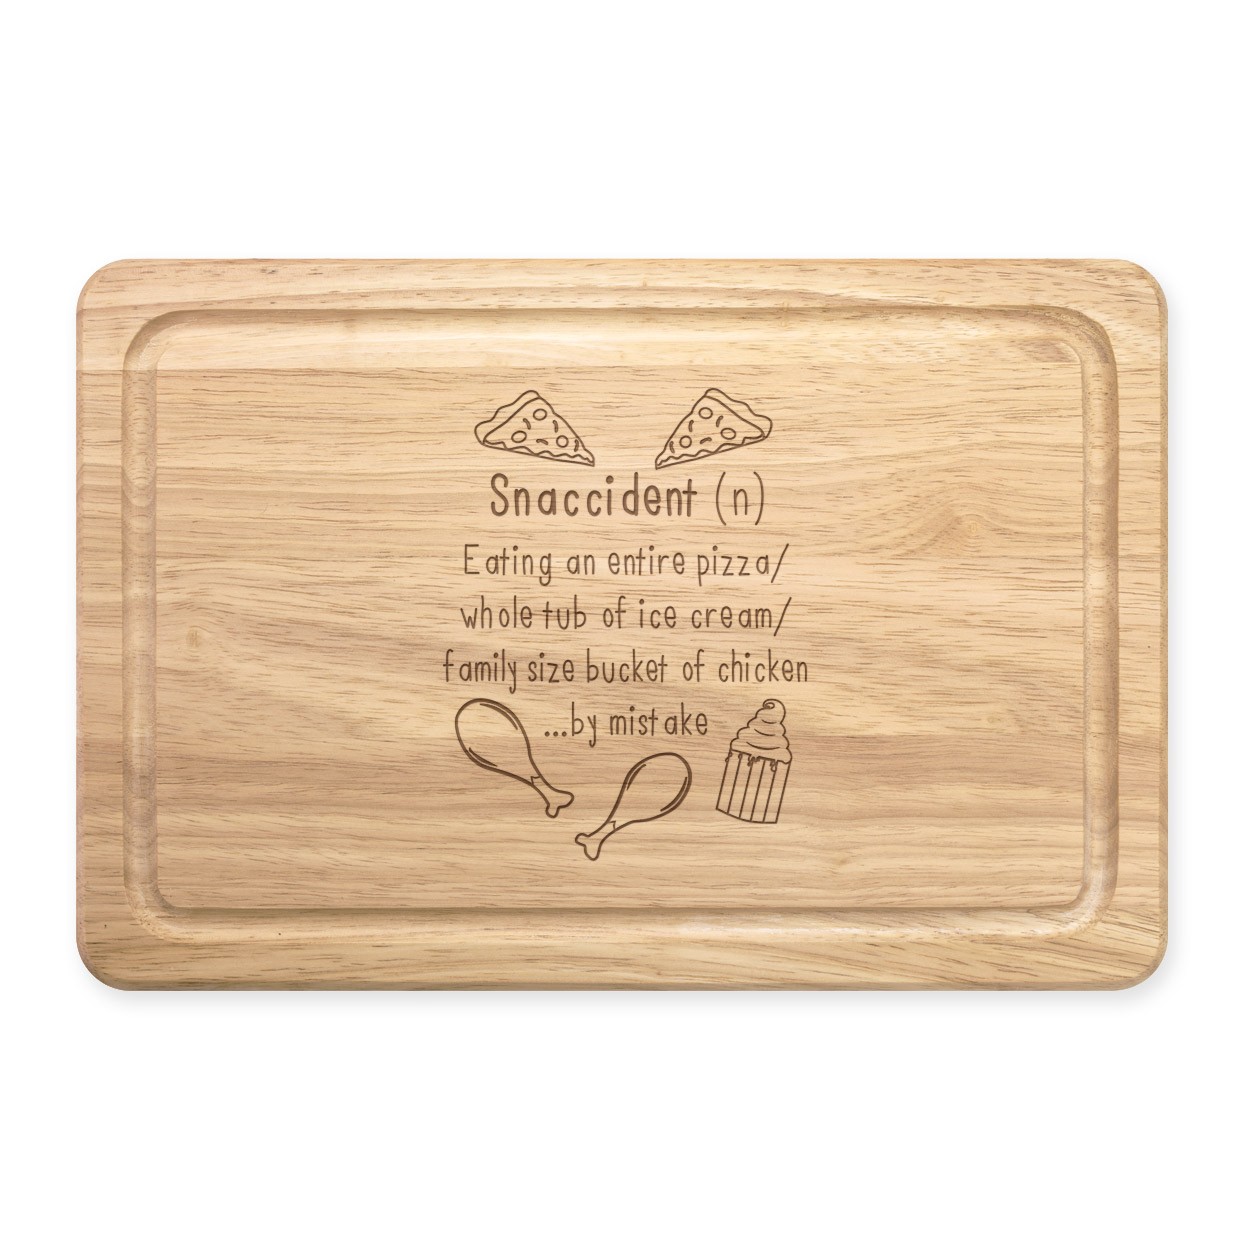 Snaccident Definition Rectangular Wooden Chopping Board